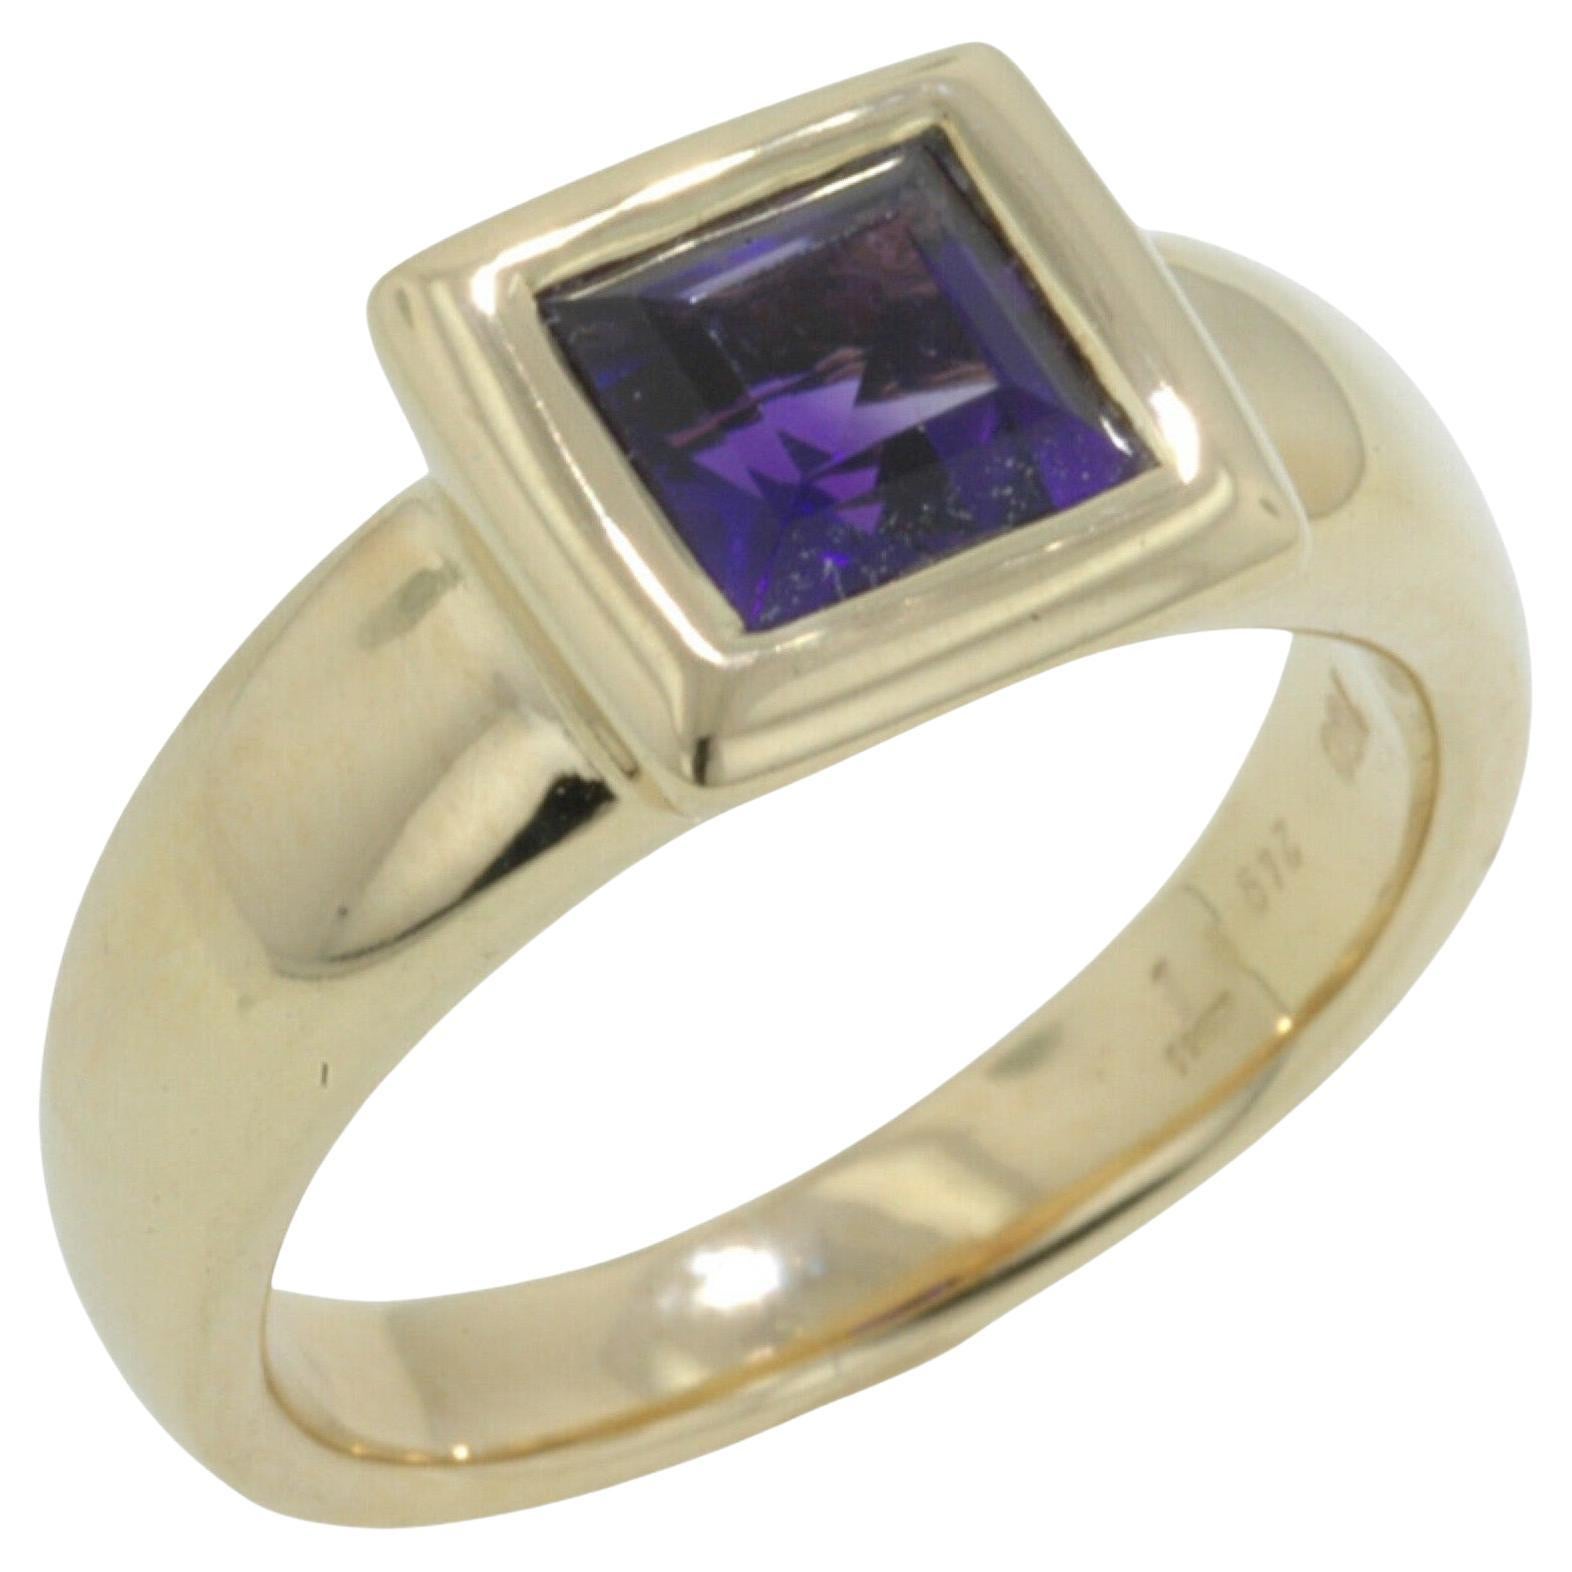 Hammer & Sohne 18K Yellow Gold Ring with Faceted Square Cut Amethyst For Sale